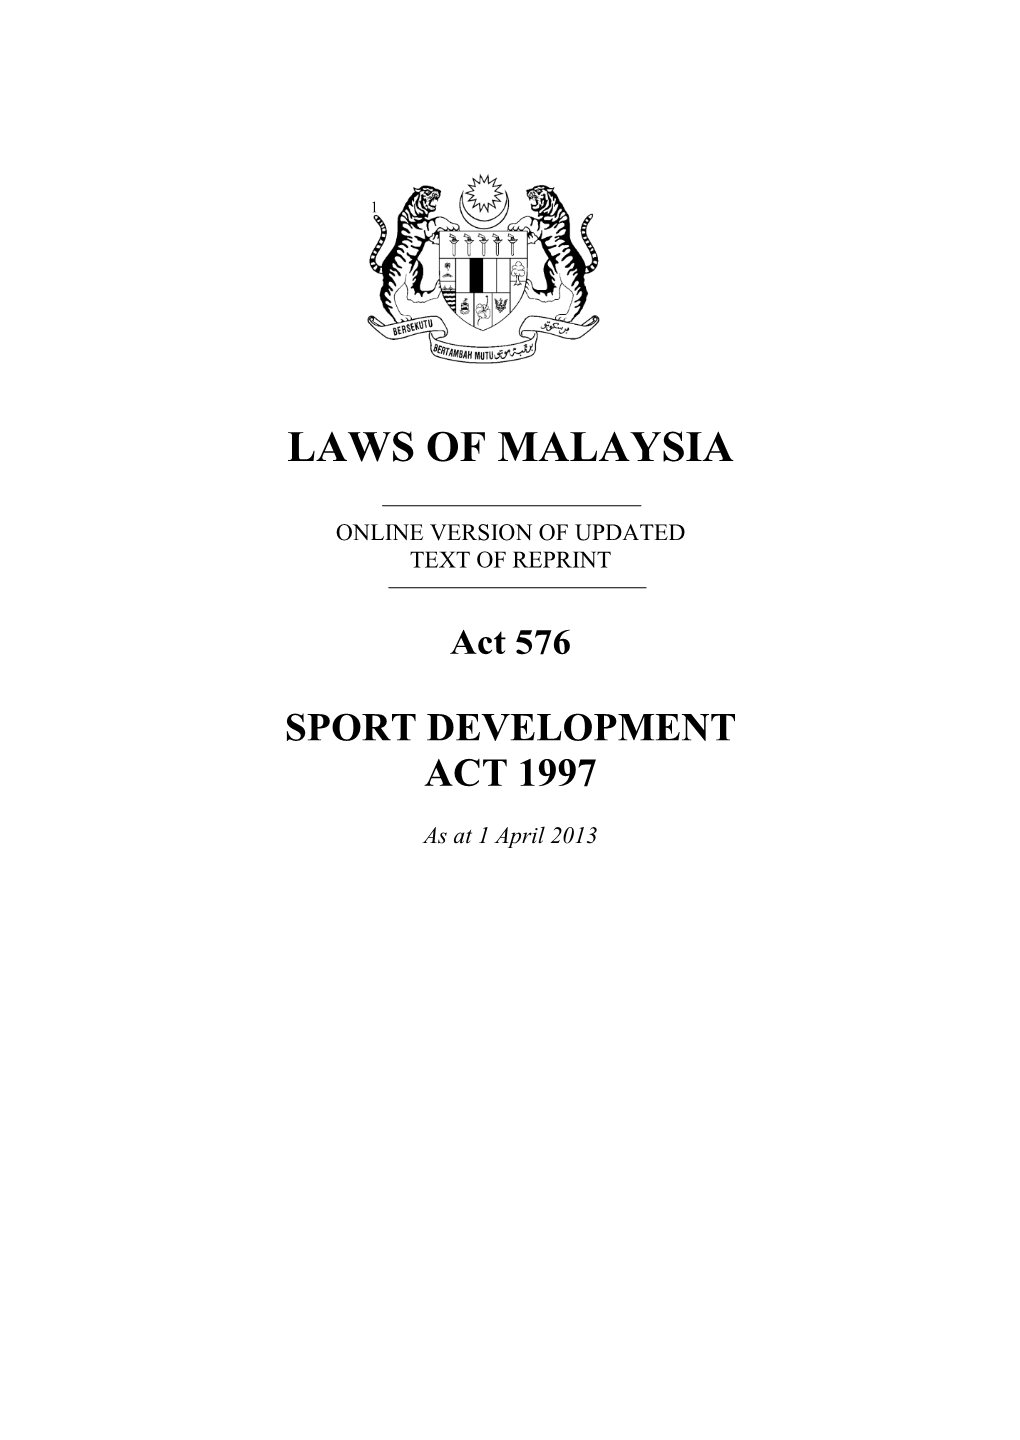 Sports Development Act 1997 and Shall Apply Throughout Malaysia